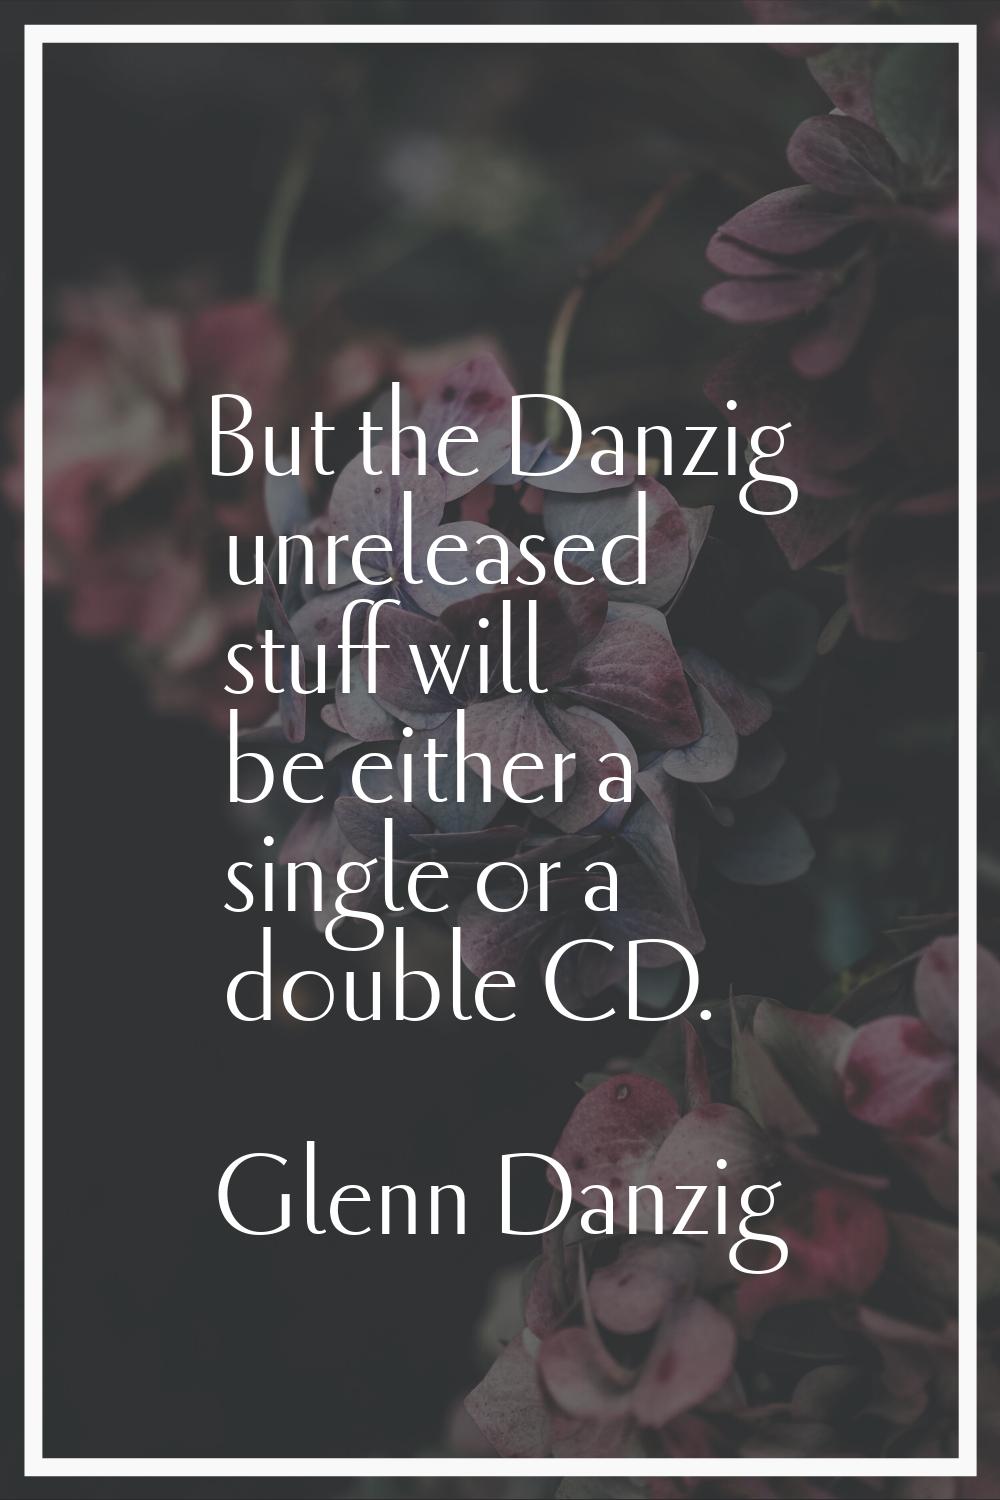 But the Danzig unreleased stuff will be either a single or a double CD.